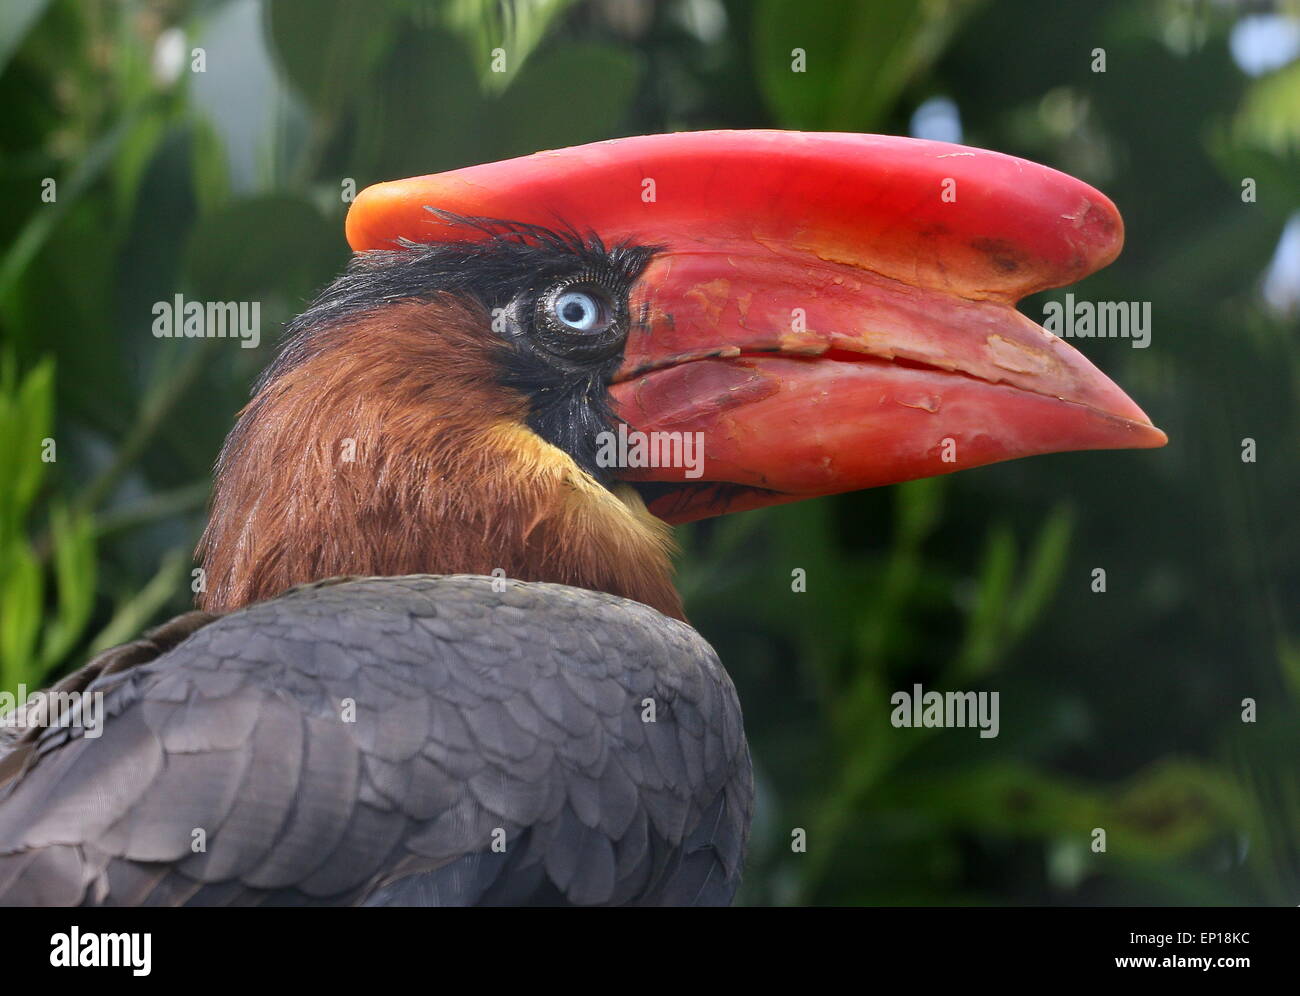 Close-up of the head of an Asian Rufous hornbill (Buceros hydrocorax), also known as Philippine hornbill Stock Photo